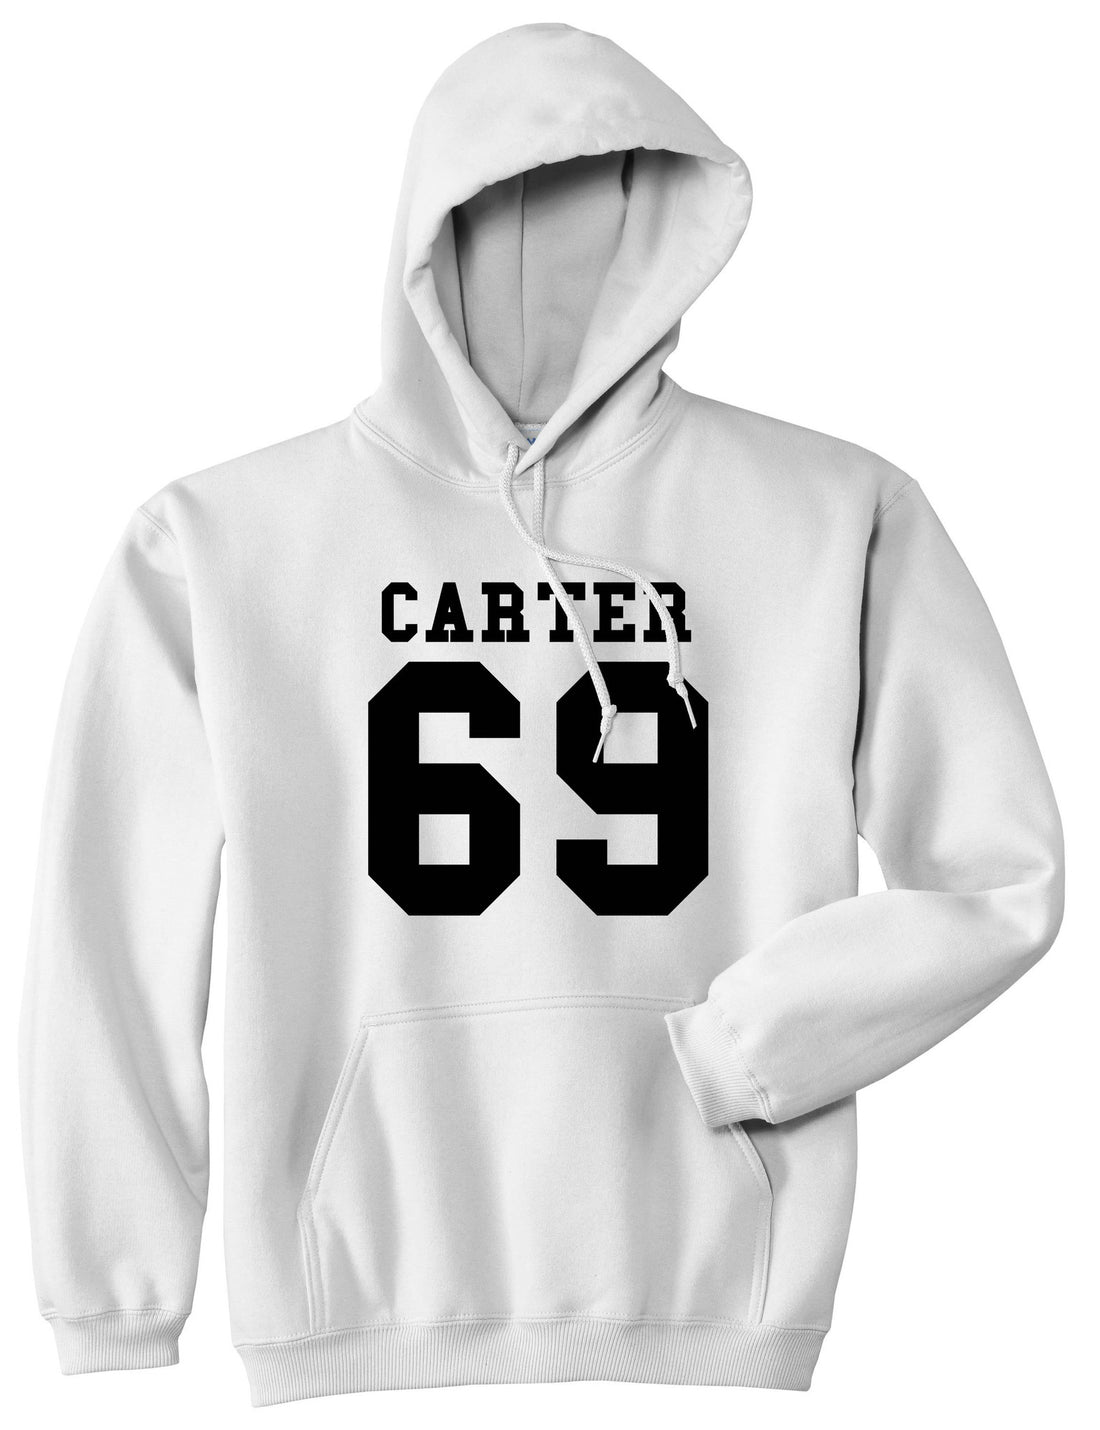  Carter 69 Team Pullover Hoodie Hoody in White by Kings Of NY